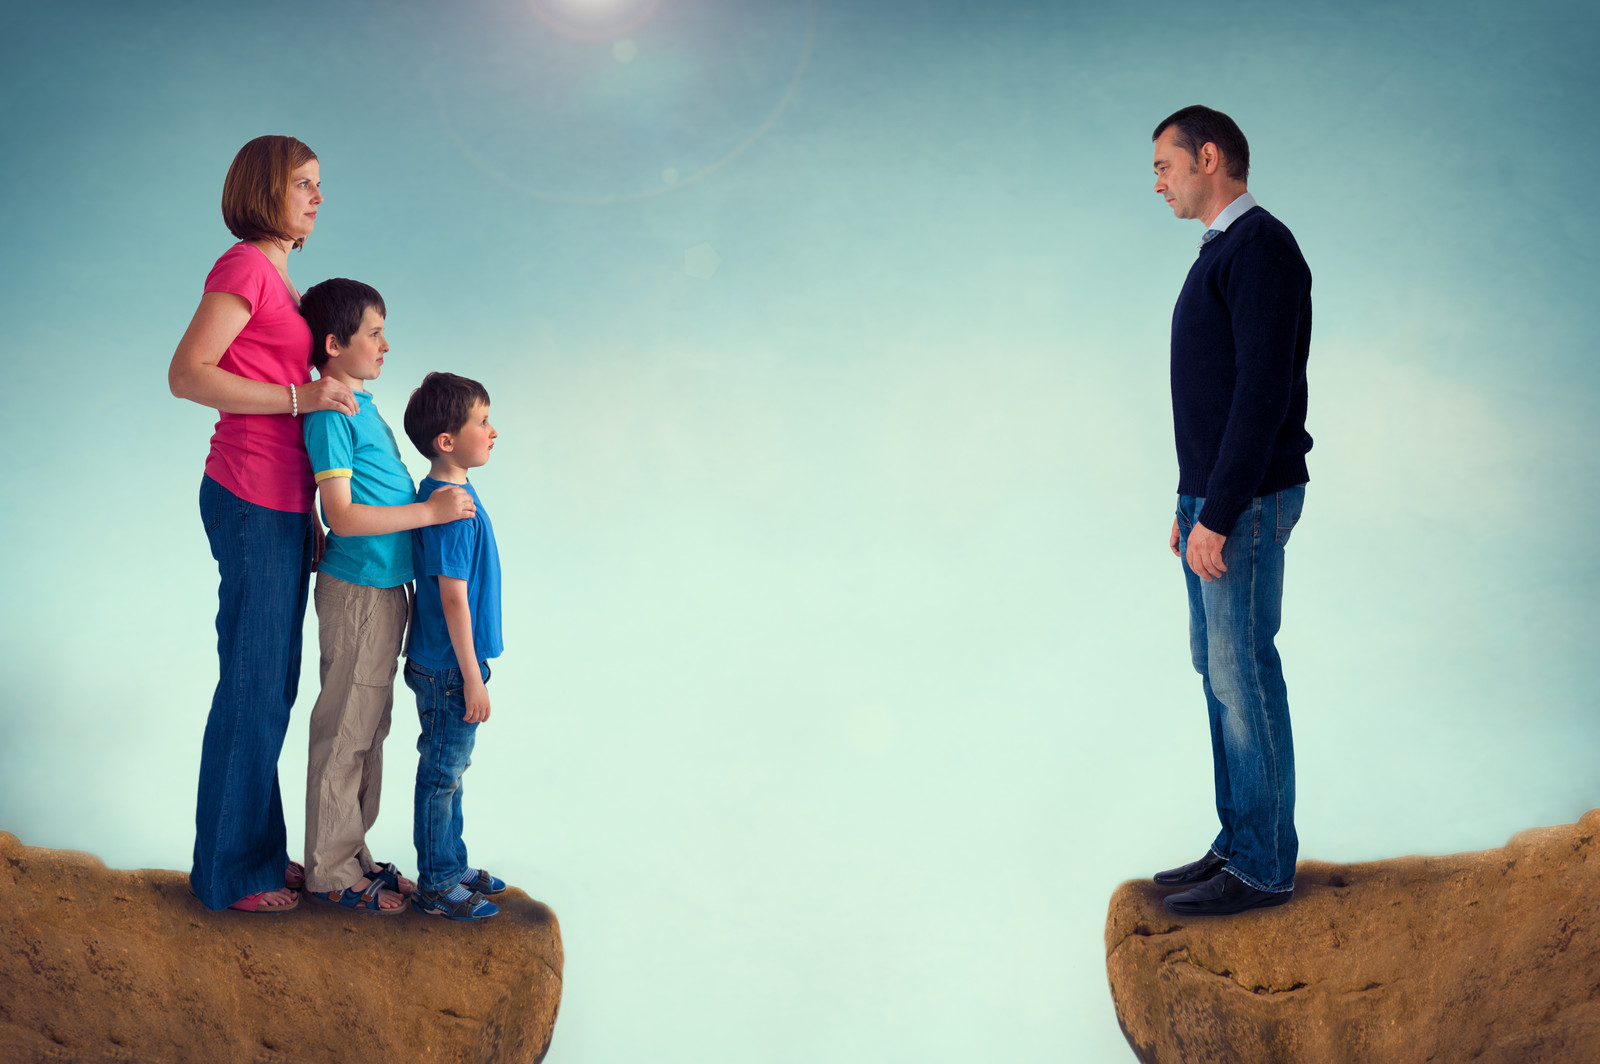 Photo concept of sad man on one cliff and unhappy wife and kids across a chasm